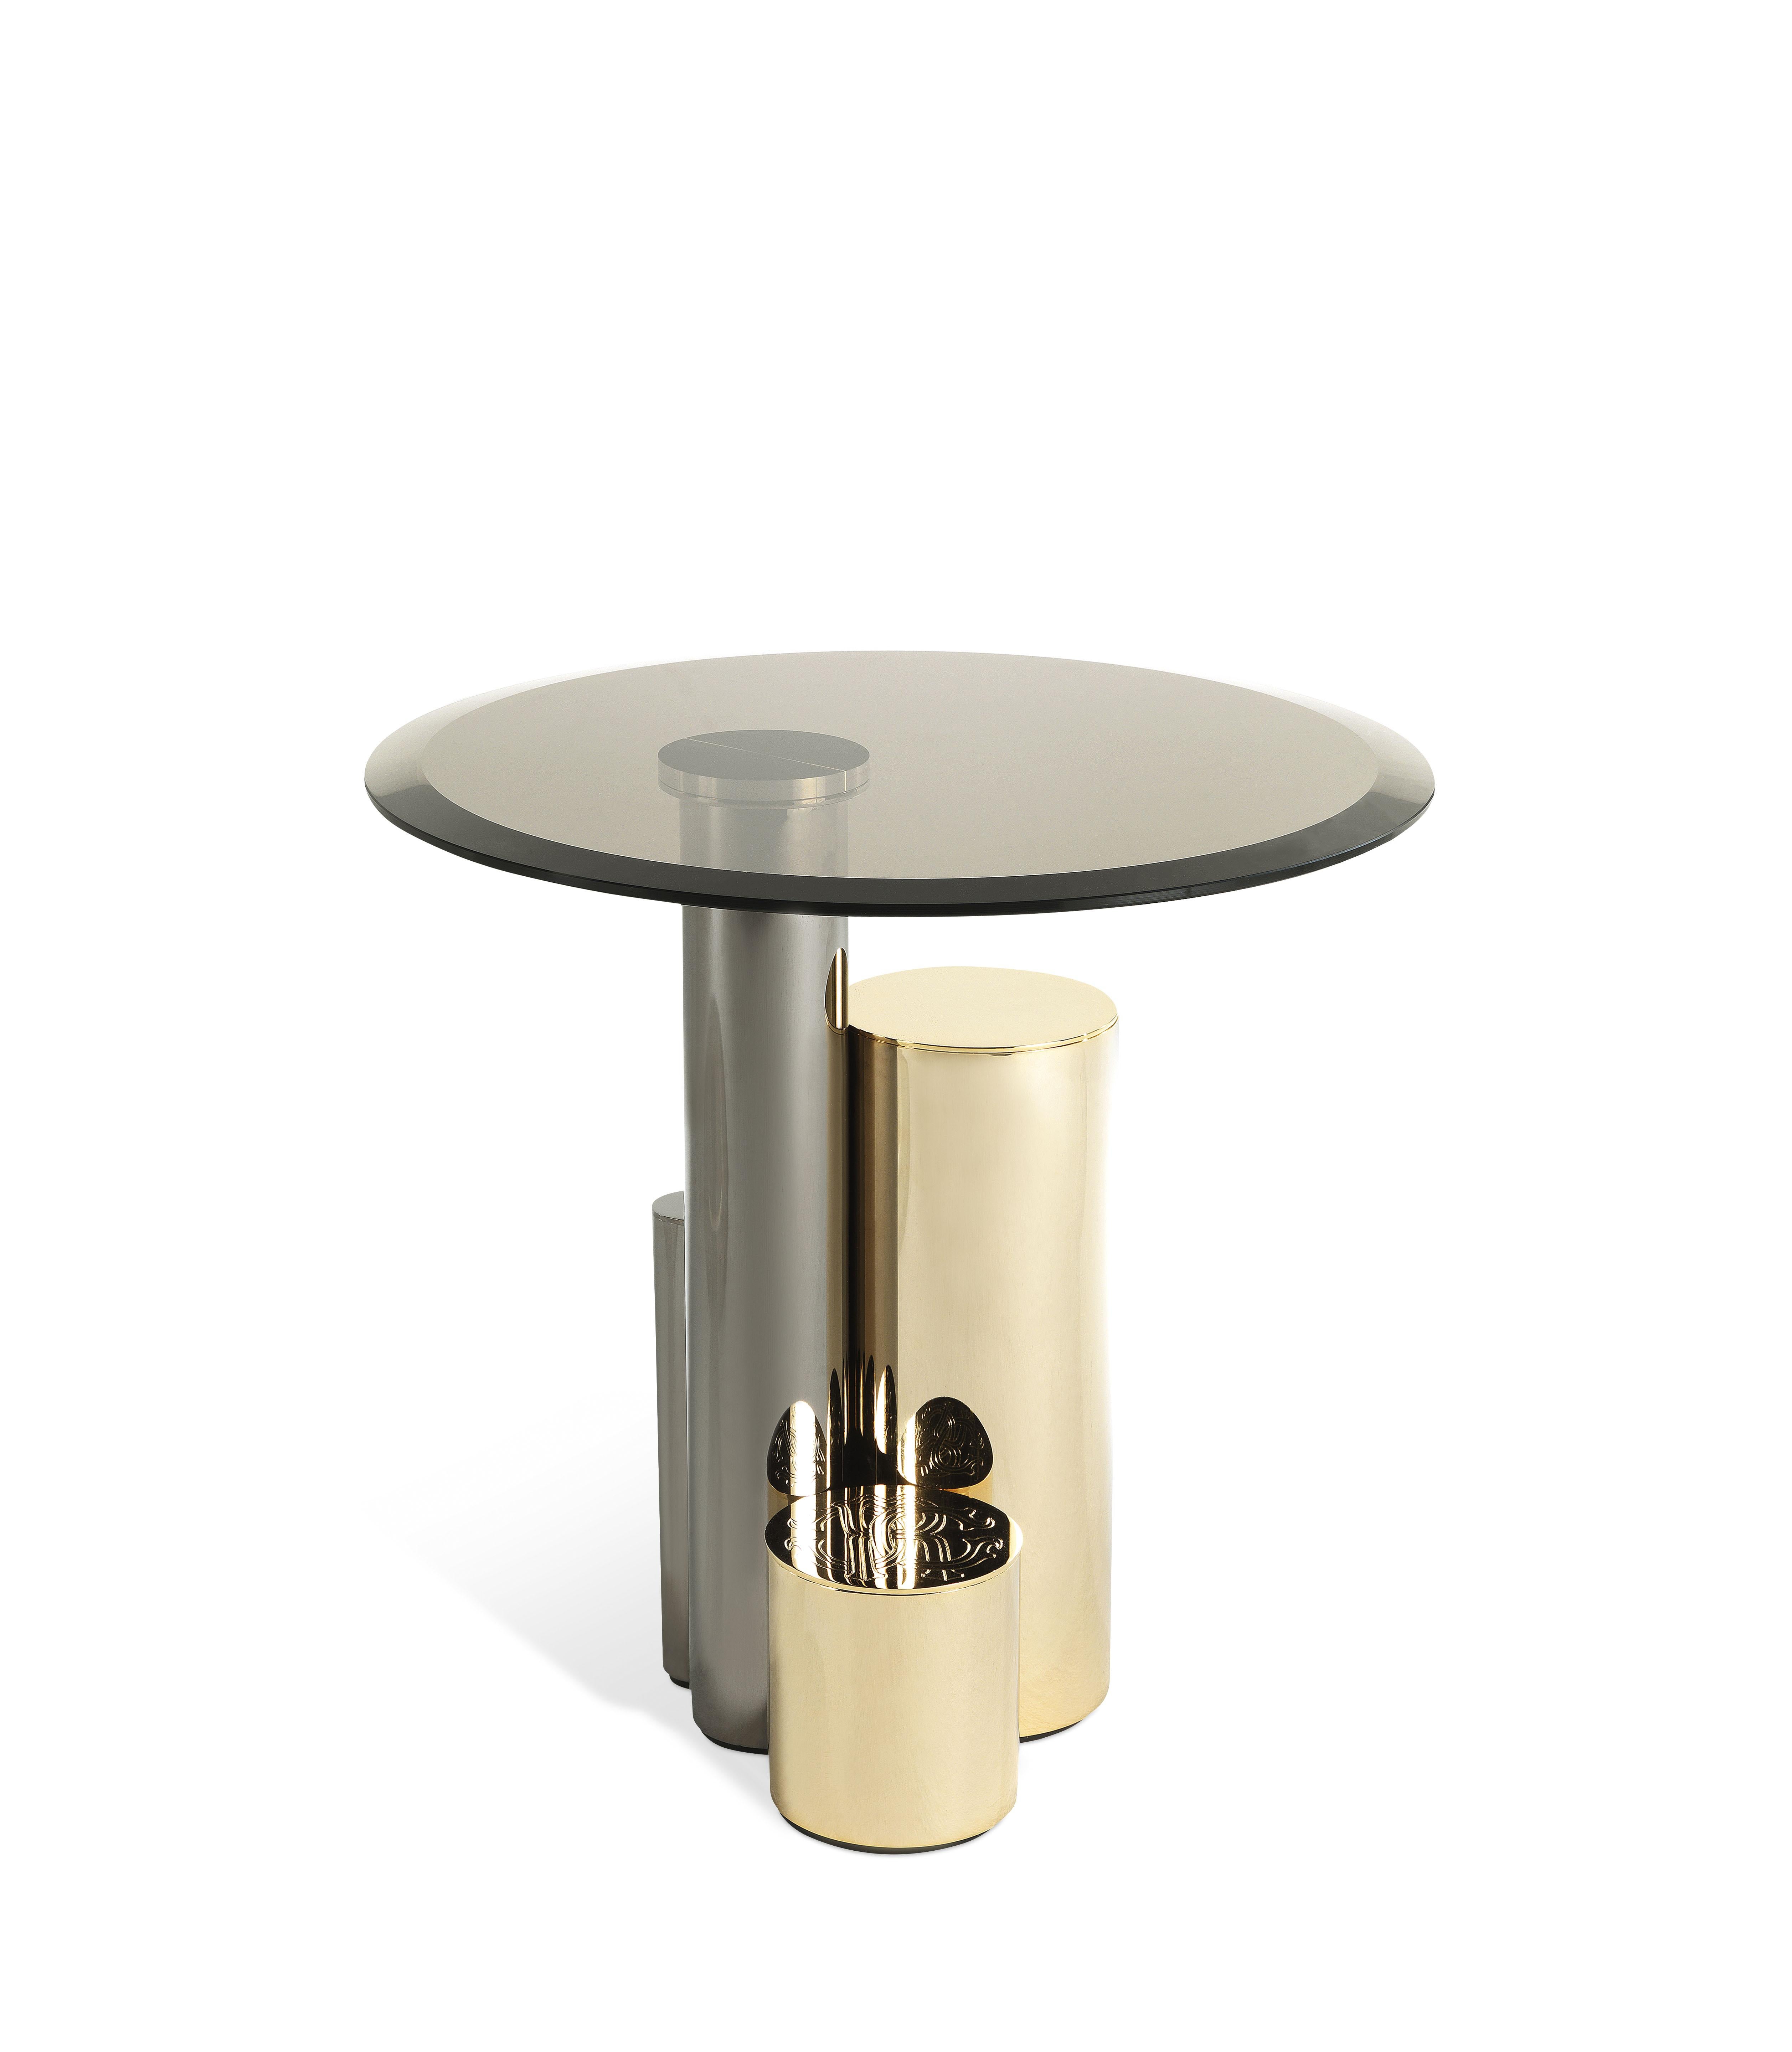 Contemporary lines and precious materials for Antigua side table. The base is created by a combination of different materials and colors: a sculptural composition consisting of metal elements with different thicknesses, heights and finishes that